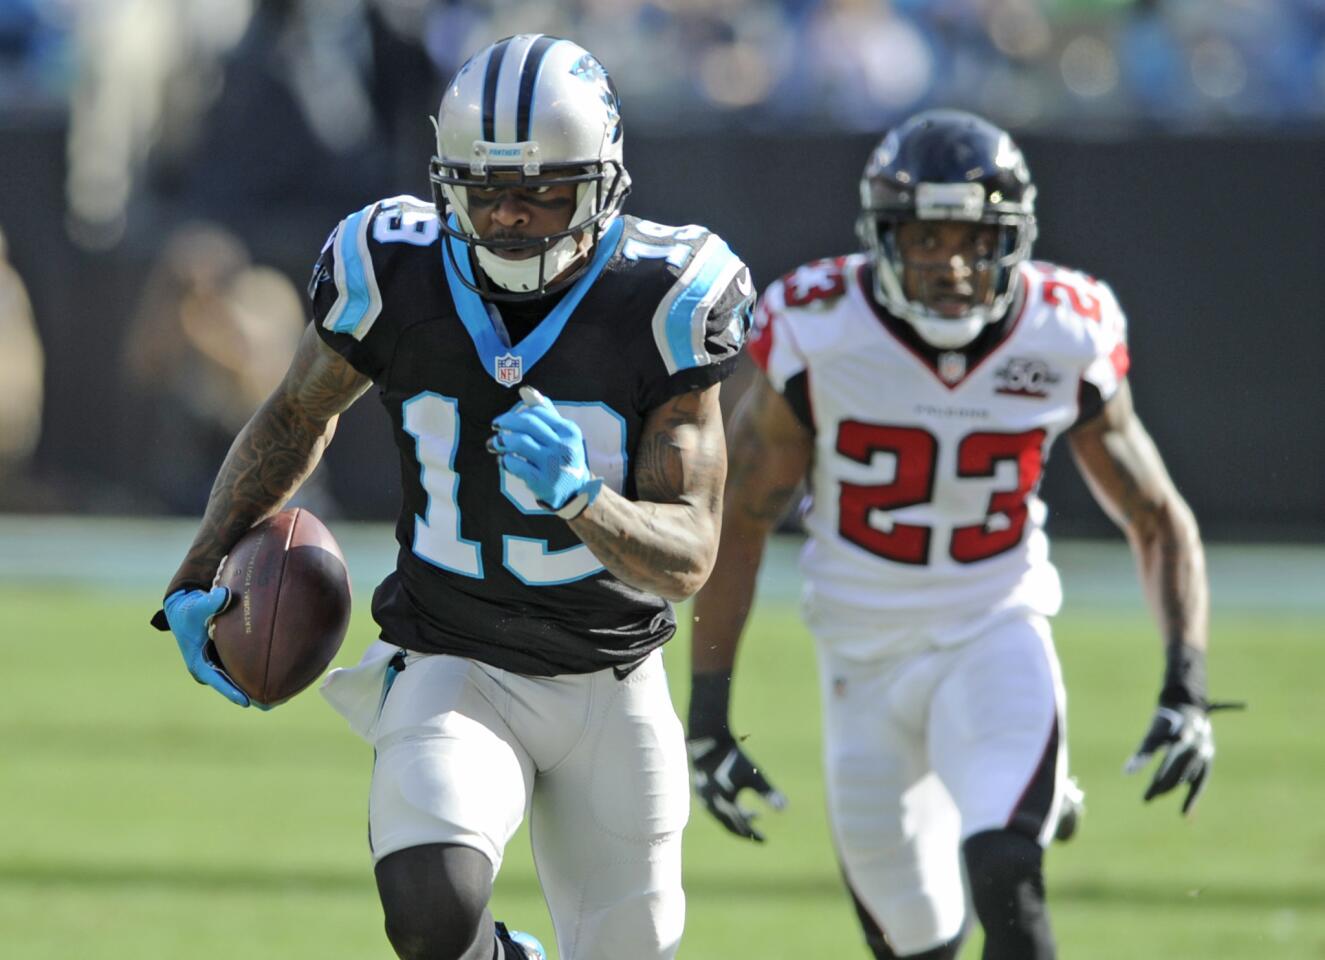 Carolina Panthers' Ted Ginn (19) runs past Atlanta Falcons' Robert Alford (23) for a touchdown after a catch in the first half of an NFL football game in Charlotte, N.C., Sunday, Dec. 13, 2015. (AP Photo/Mike McCarn)